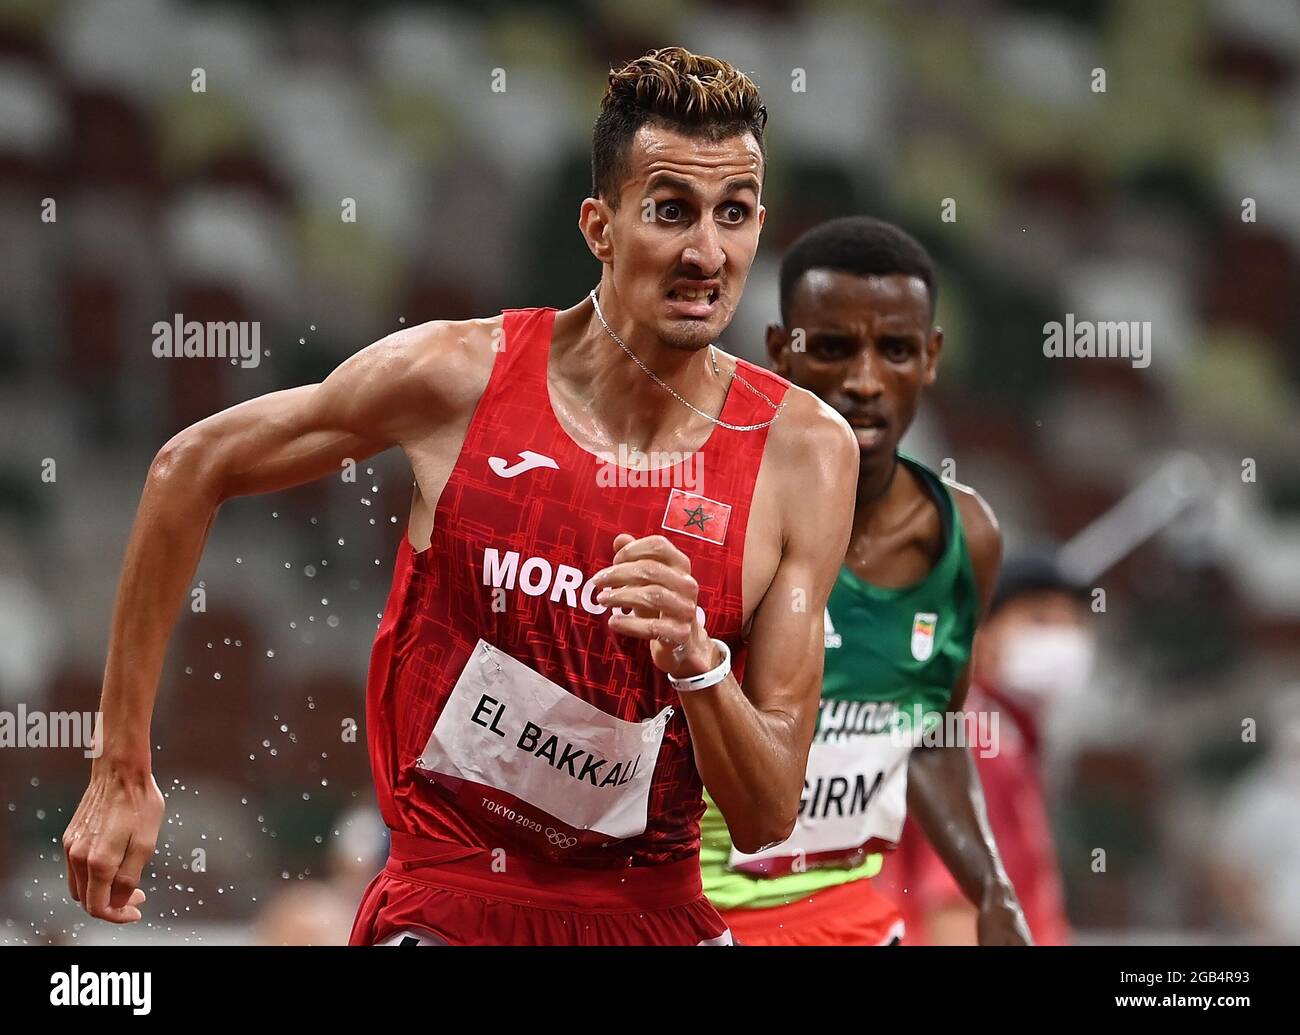 Tokyo, Japan. 2nd Aug, 2021. Soufiane El Bakkali of Morocco competes during the men's 3000m steeplechase final at Tokyo 2020 Olympic Games, in Tokyo, Japan, Aug. 2, 2021. Credit: Li Yibo/Xinhua/Alamy Live News Stock Photo